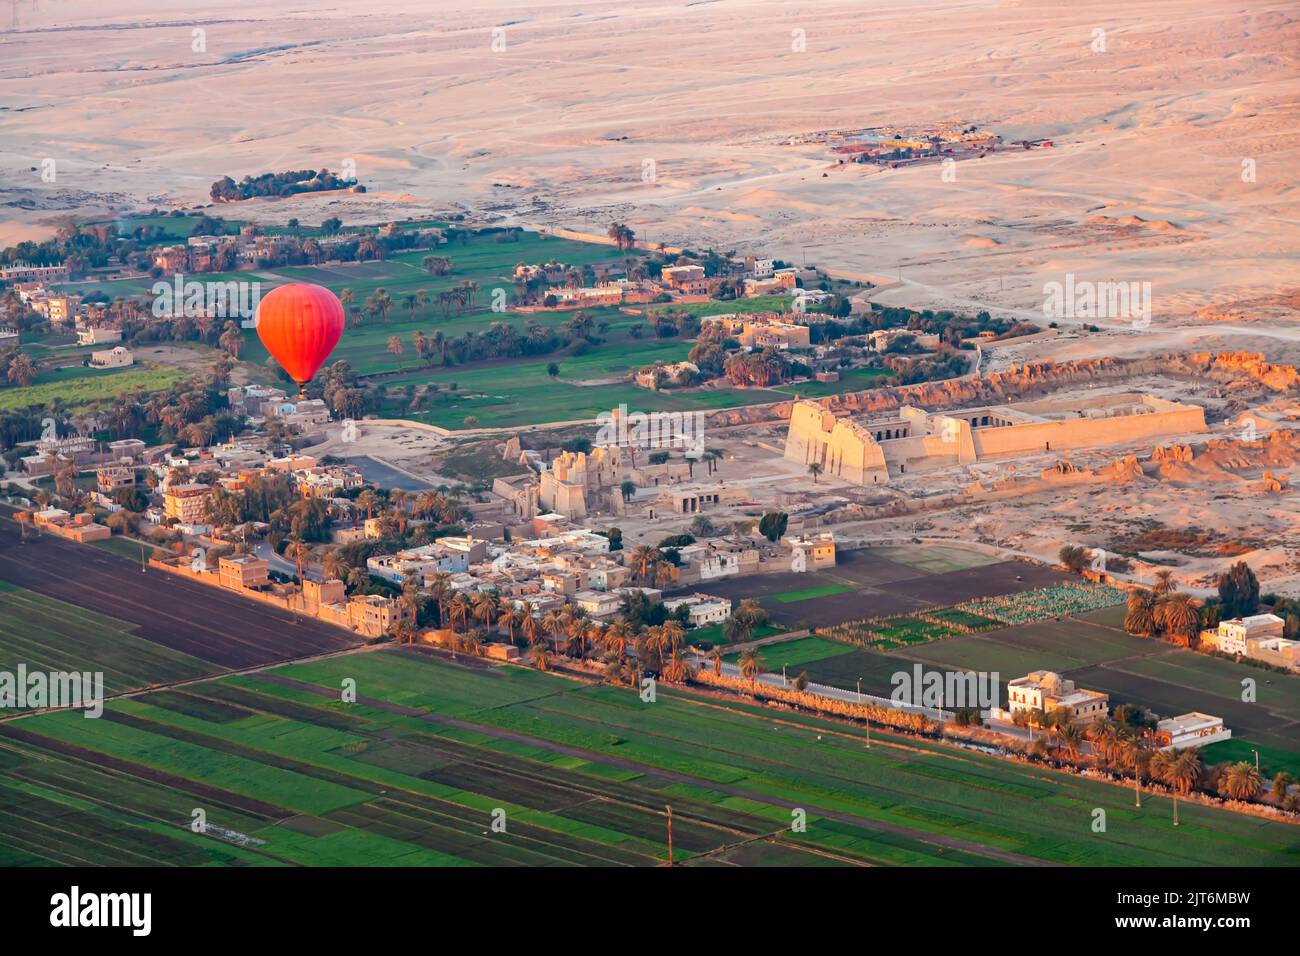 Red hot air balloon flying over the viiage in Theban Necropolis at Valley of The Kings with The Mortuary Temple of Ramesses III at Medinet Habu and a Stock Photo